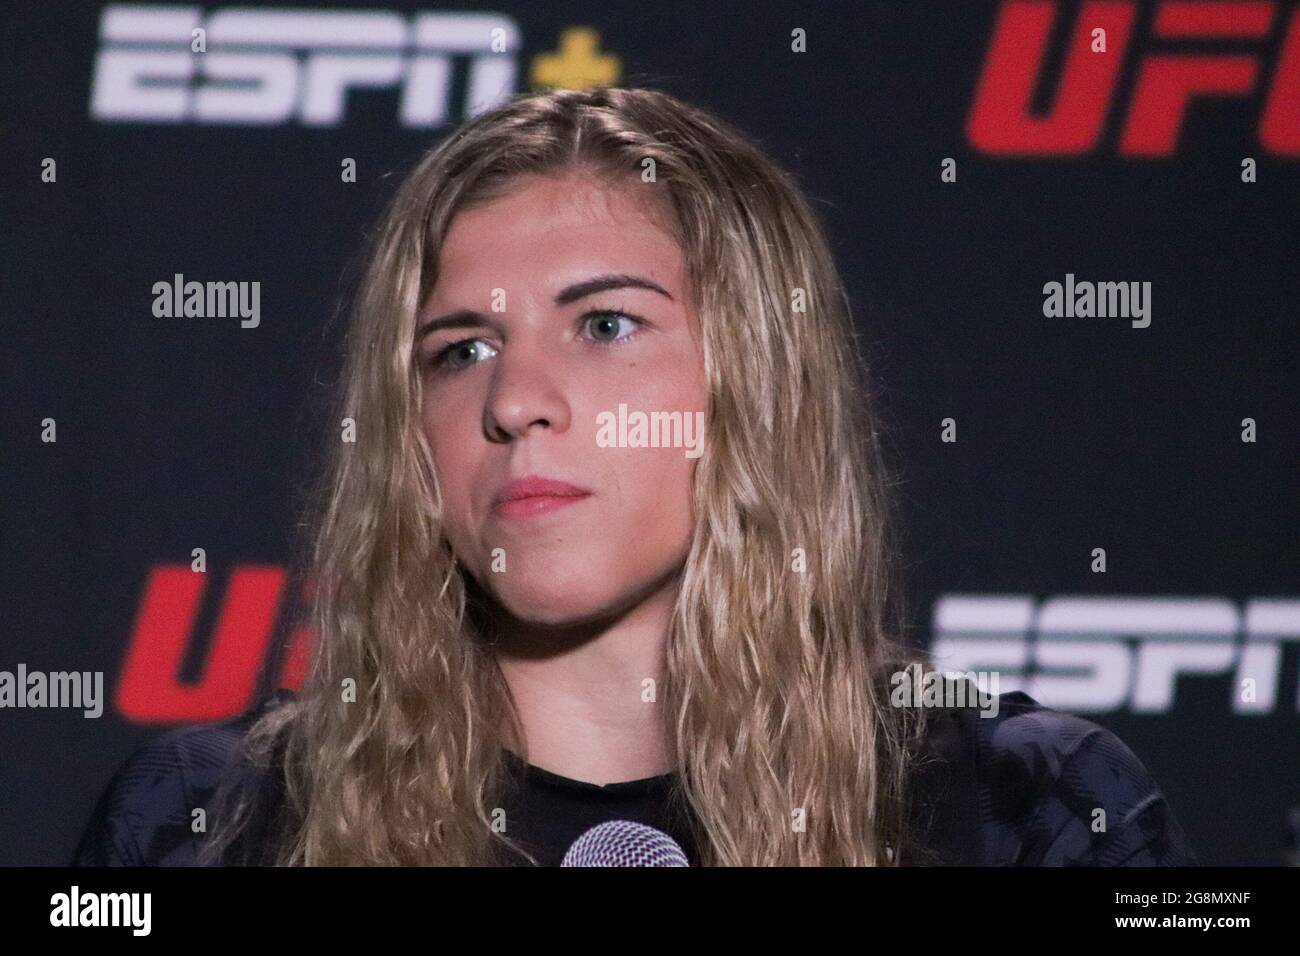 Las Vegas, Nevada, United States. 21st July, 2021. LAS VEGAS, NV - JULY 21: Miranda Maverick interacts with media during the UFC Vegas 32: Media Day at UFC Apex on July 21, 2021 in Las Vegas, Nevada, United States. (Photo by Diego Ribas/PxImages) Credit: Px Images/Alamy Live News Stock Photo